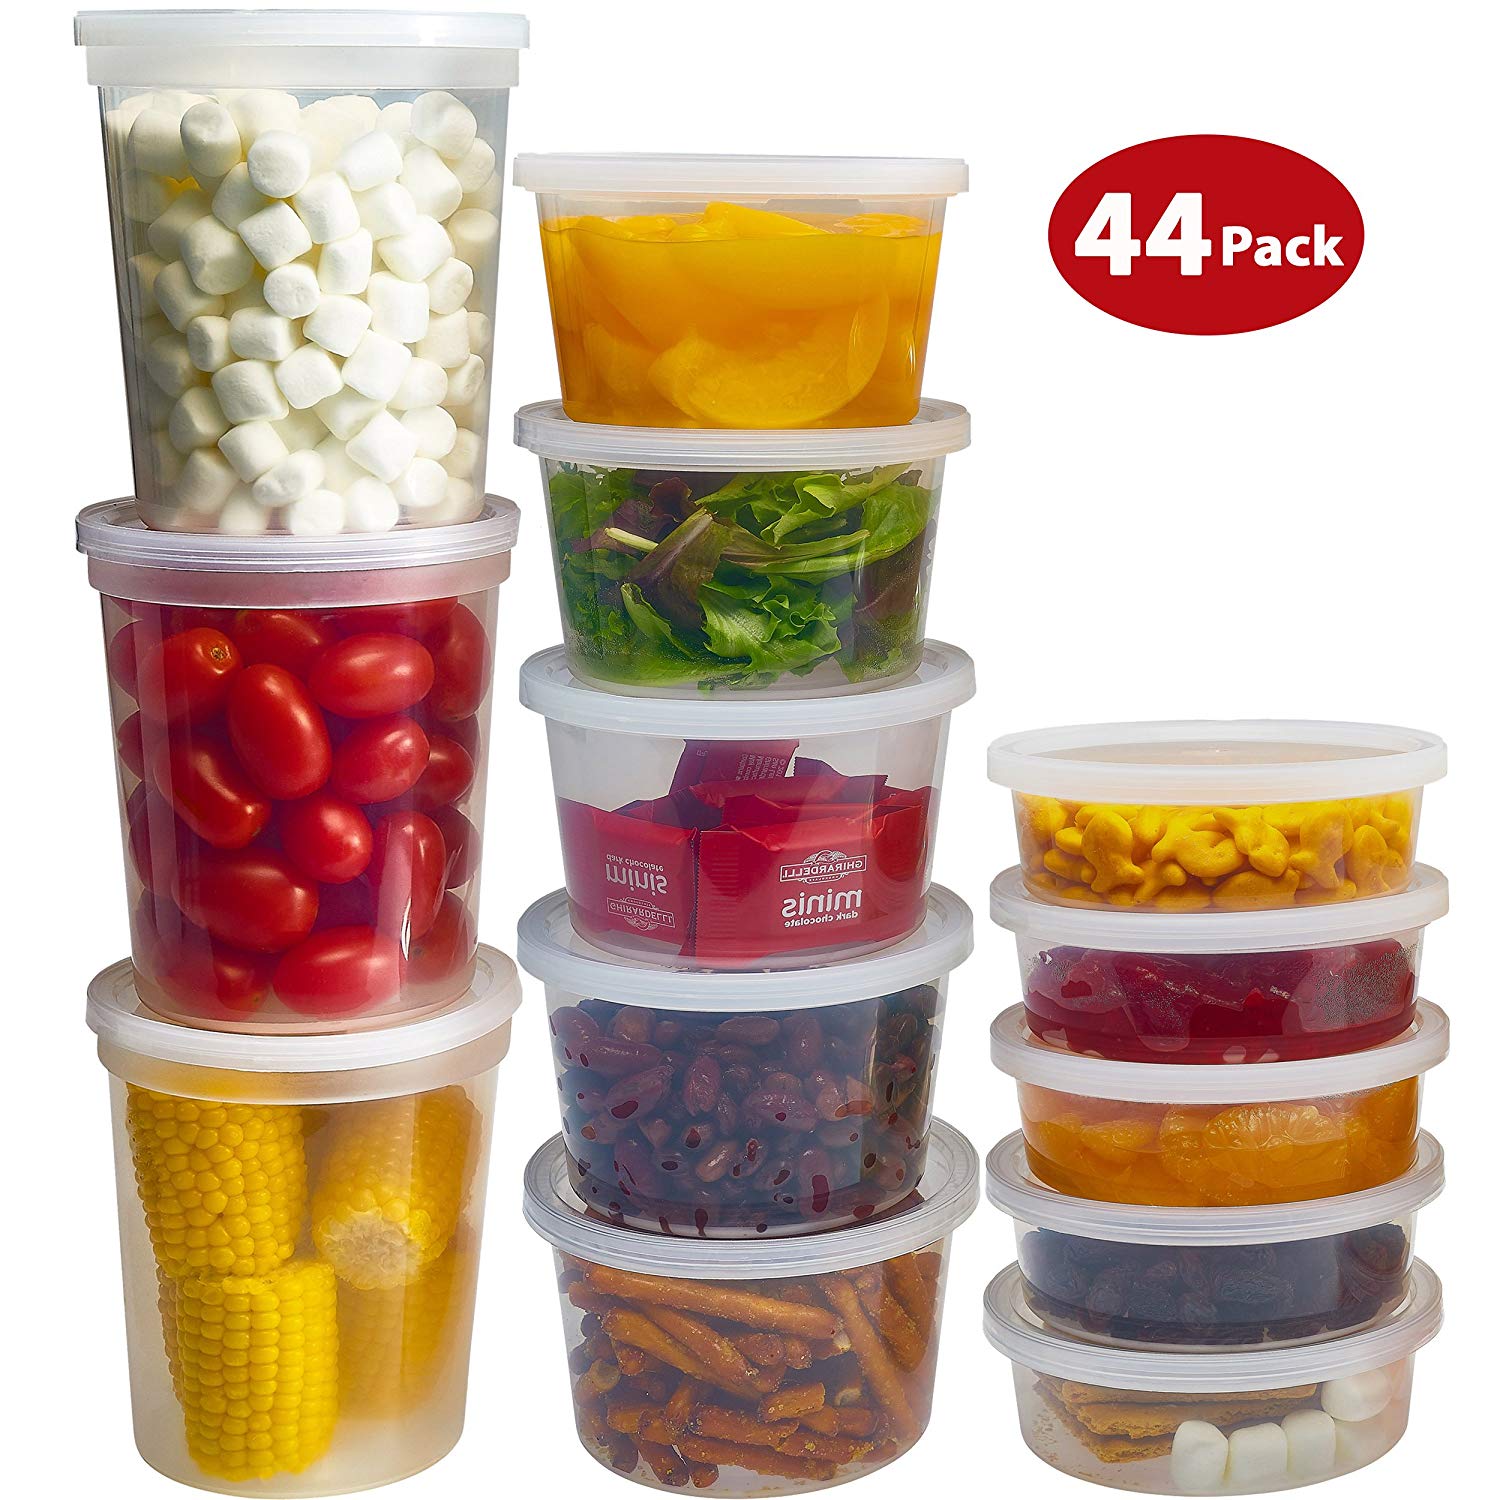 DuraHome Food Storage Containers with Lids, Set of 44